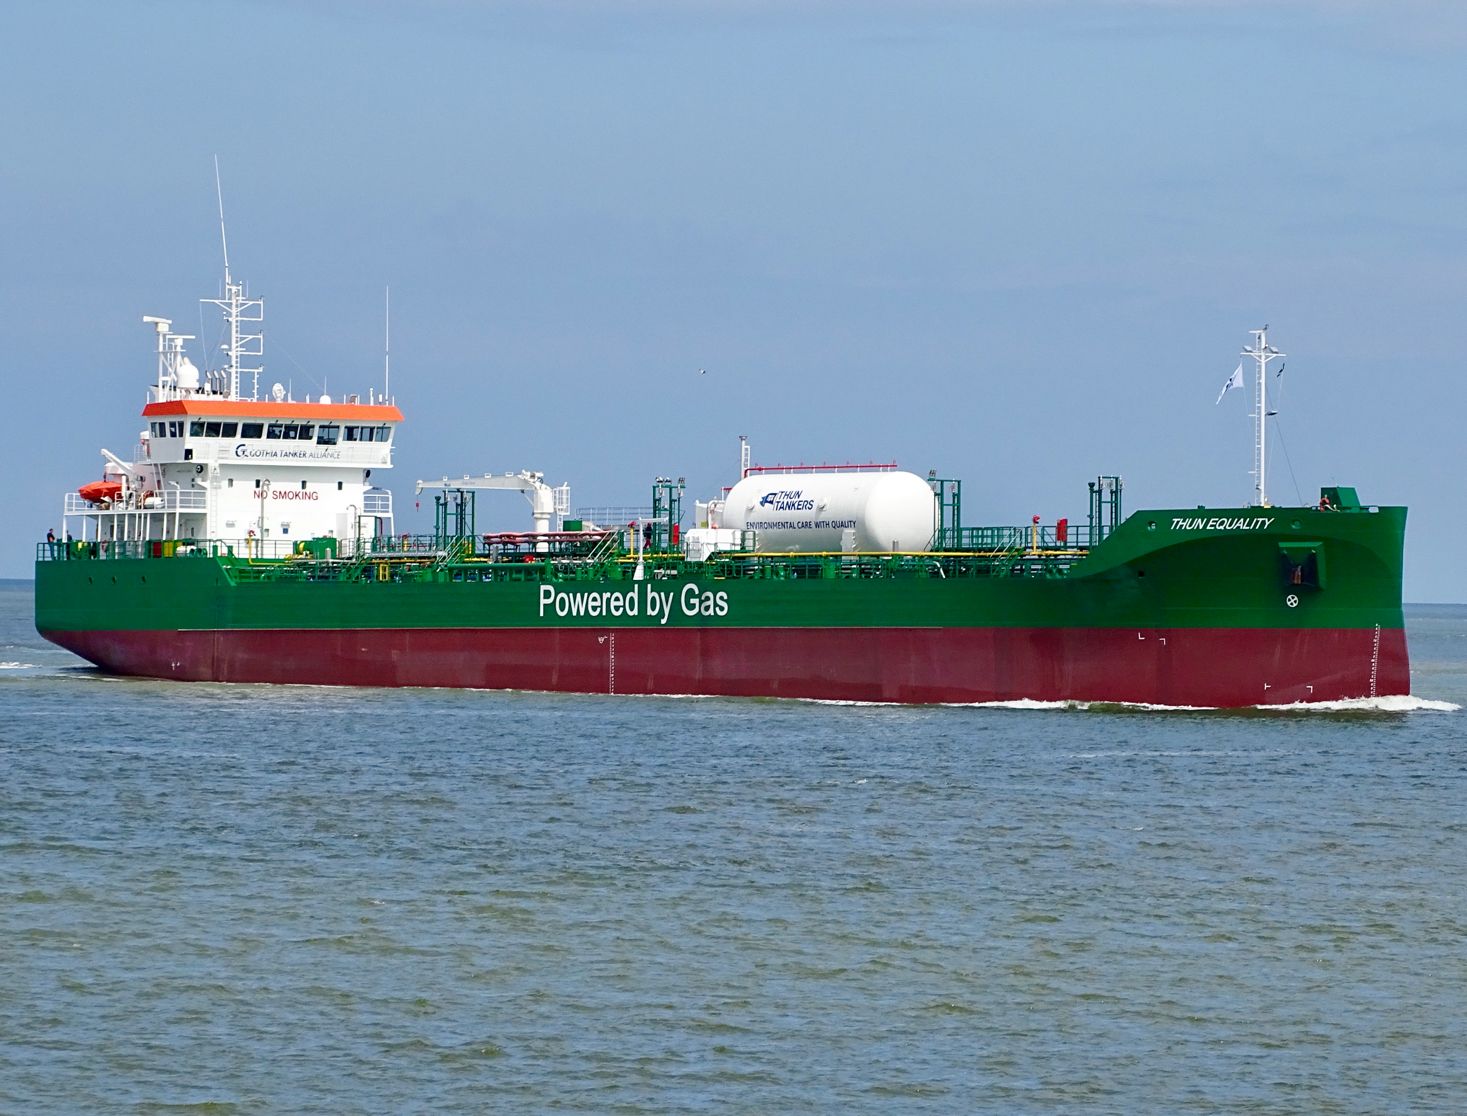 Thun Tankers welcomes another LNG-powered newbuild in its fleet